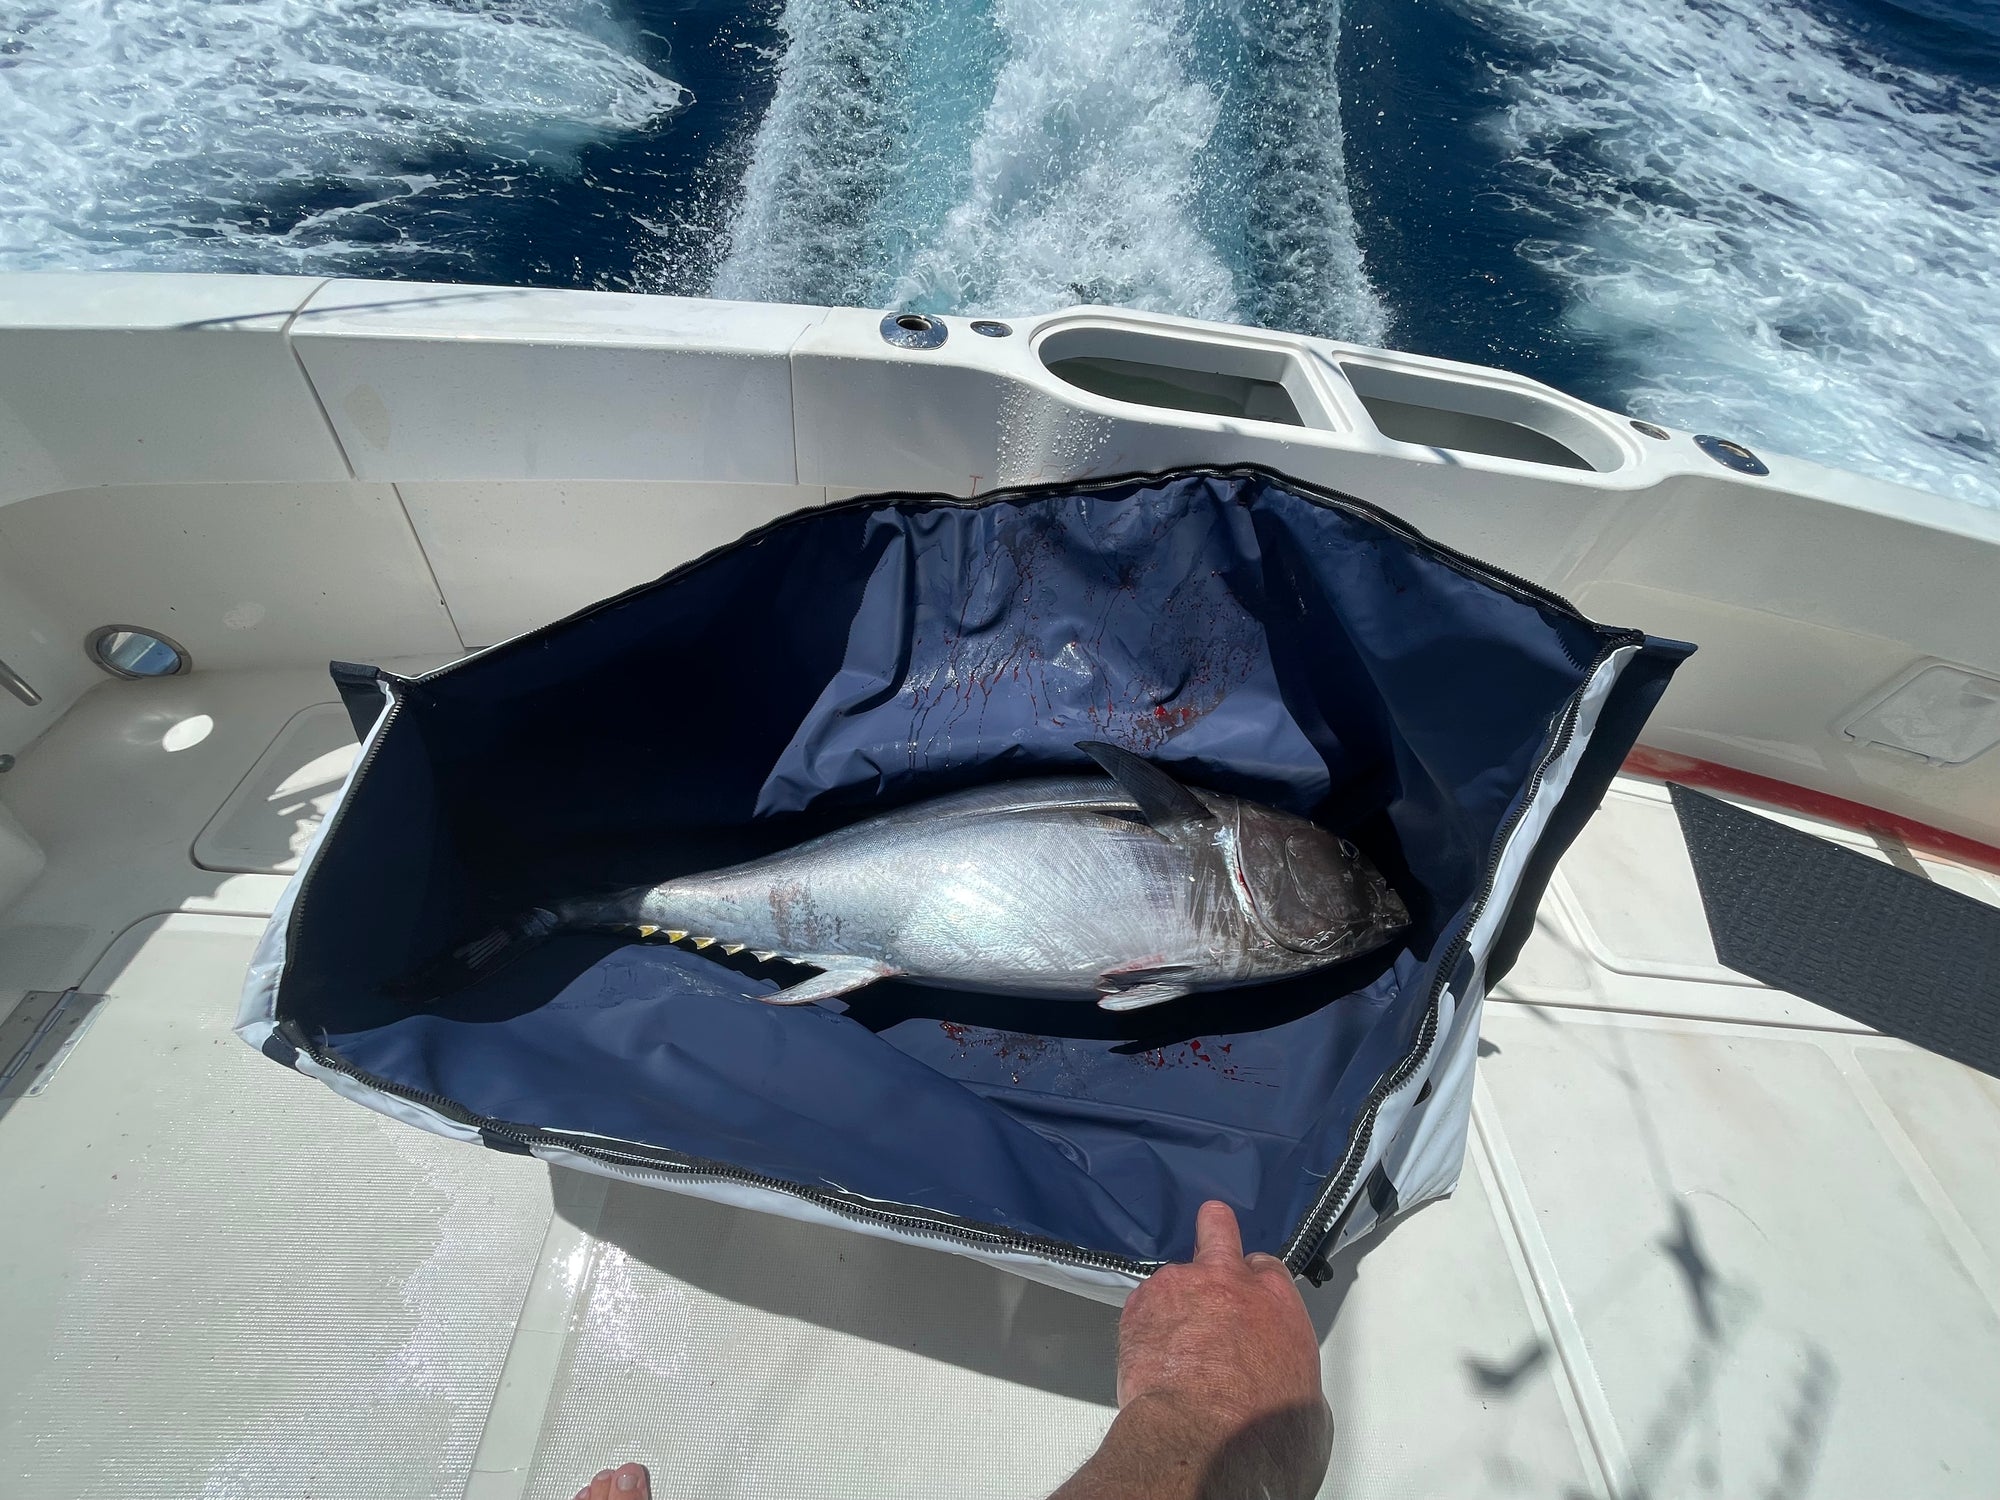 San Diego to 14 Mile Bank for Blue Fin Tuna